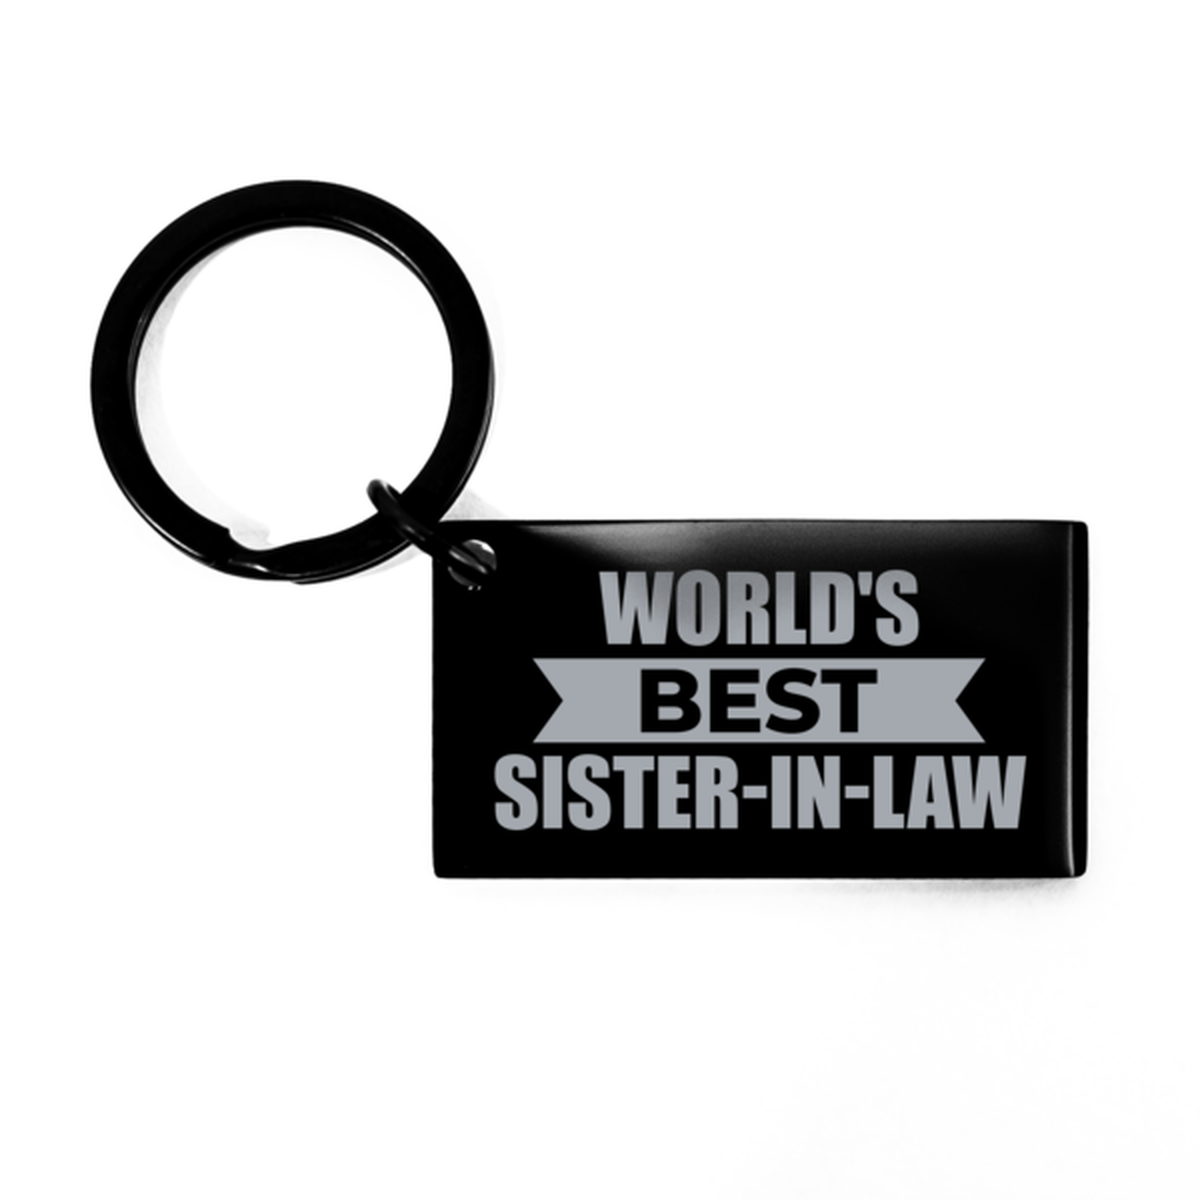 Worlds Best Sister-in-law Gifts, Funny Black Engraved Keychain For Sister-in-law, Birthday Presents For Women